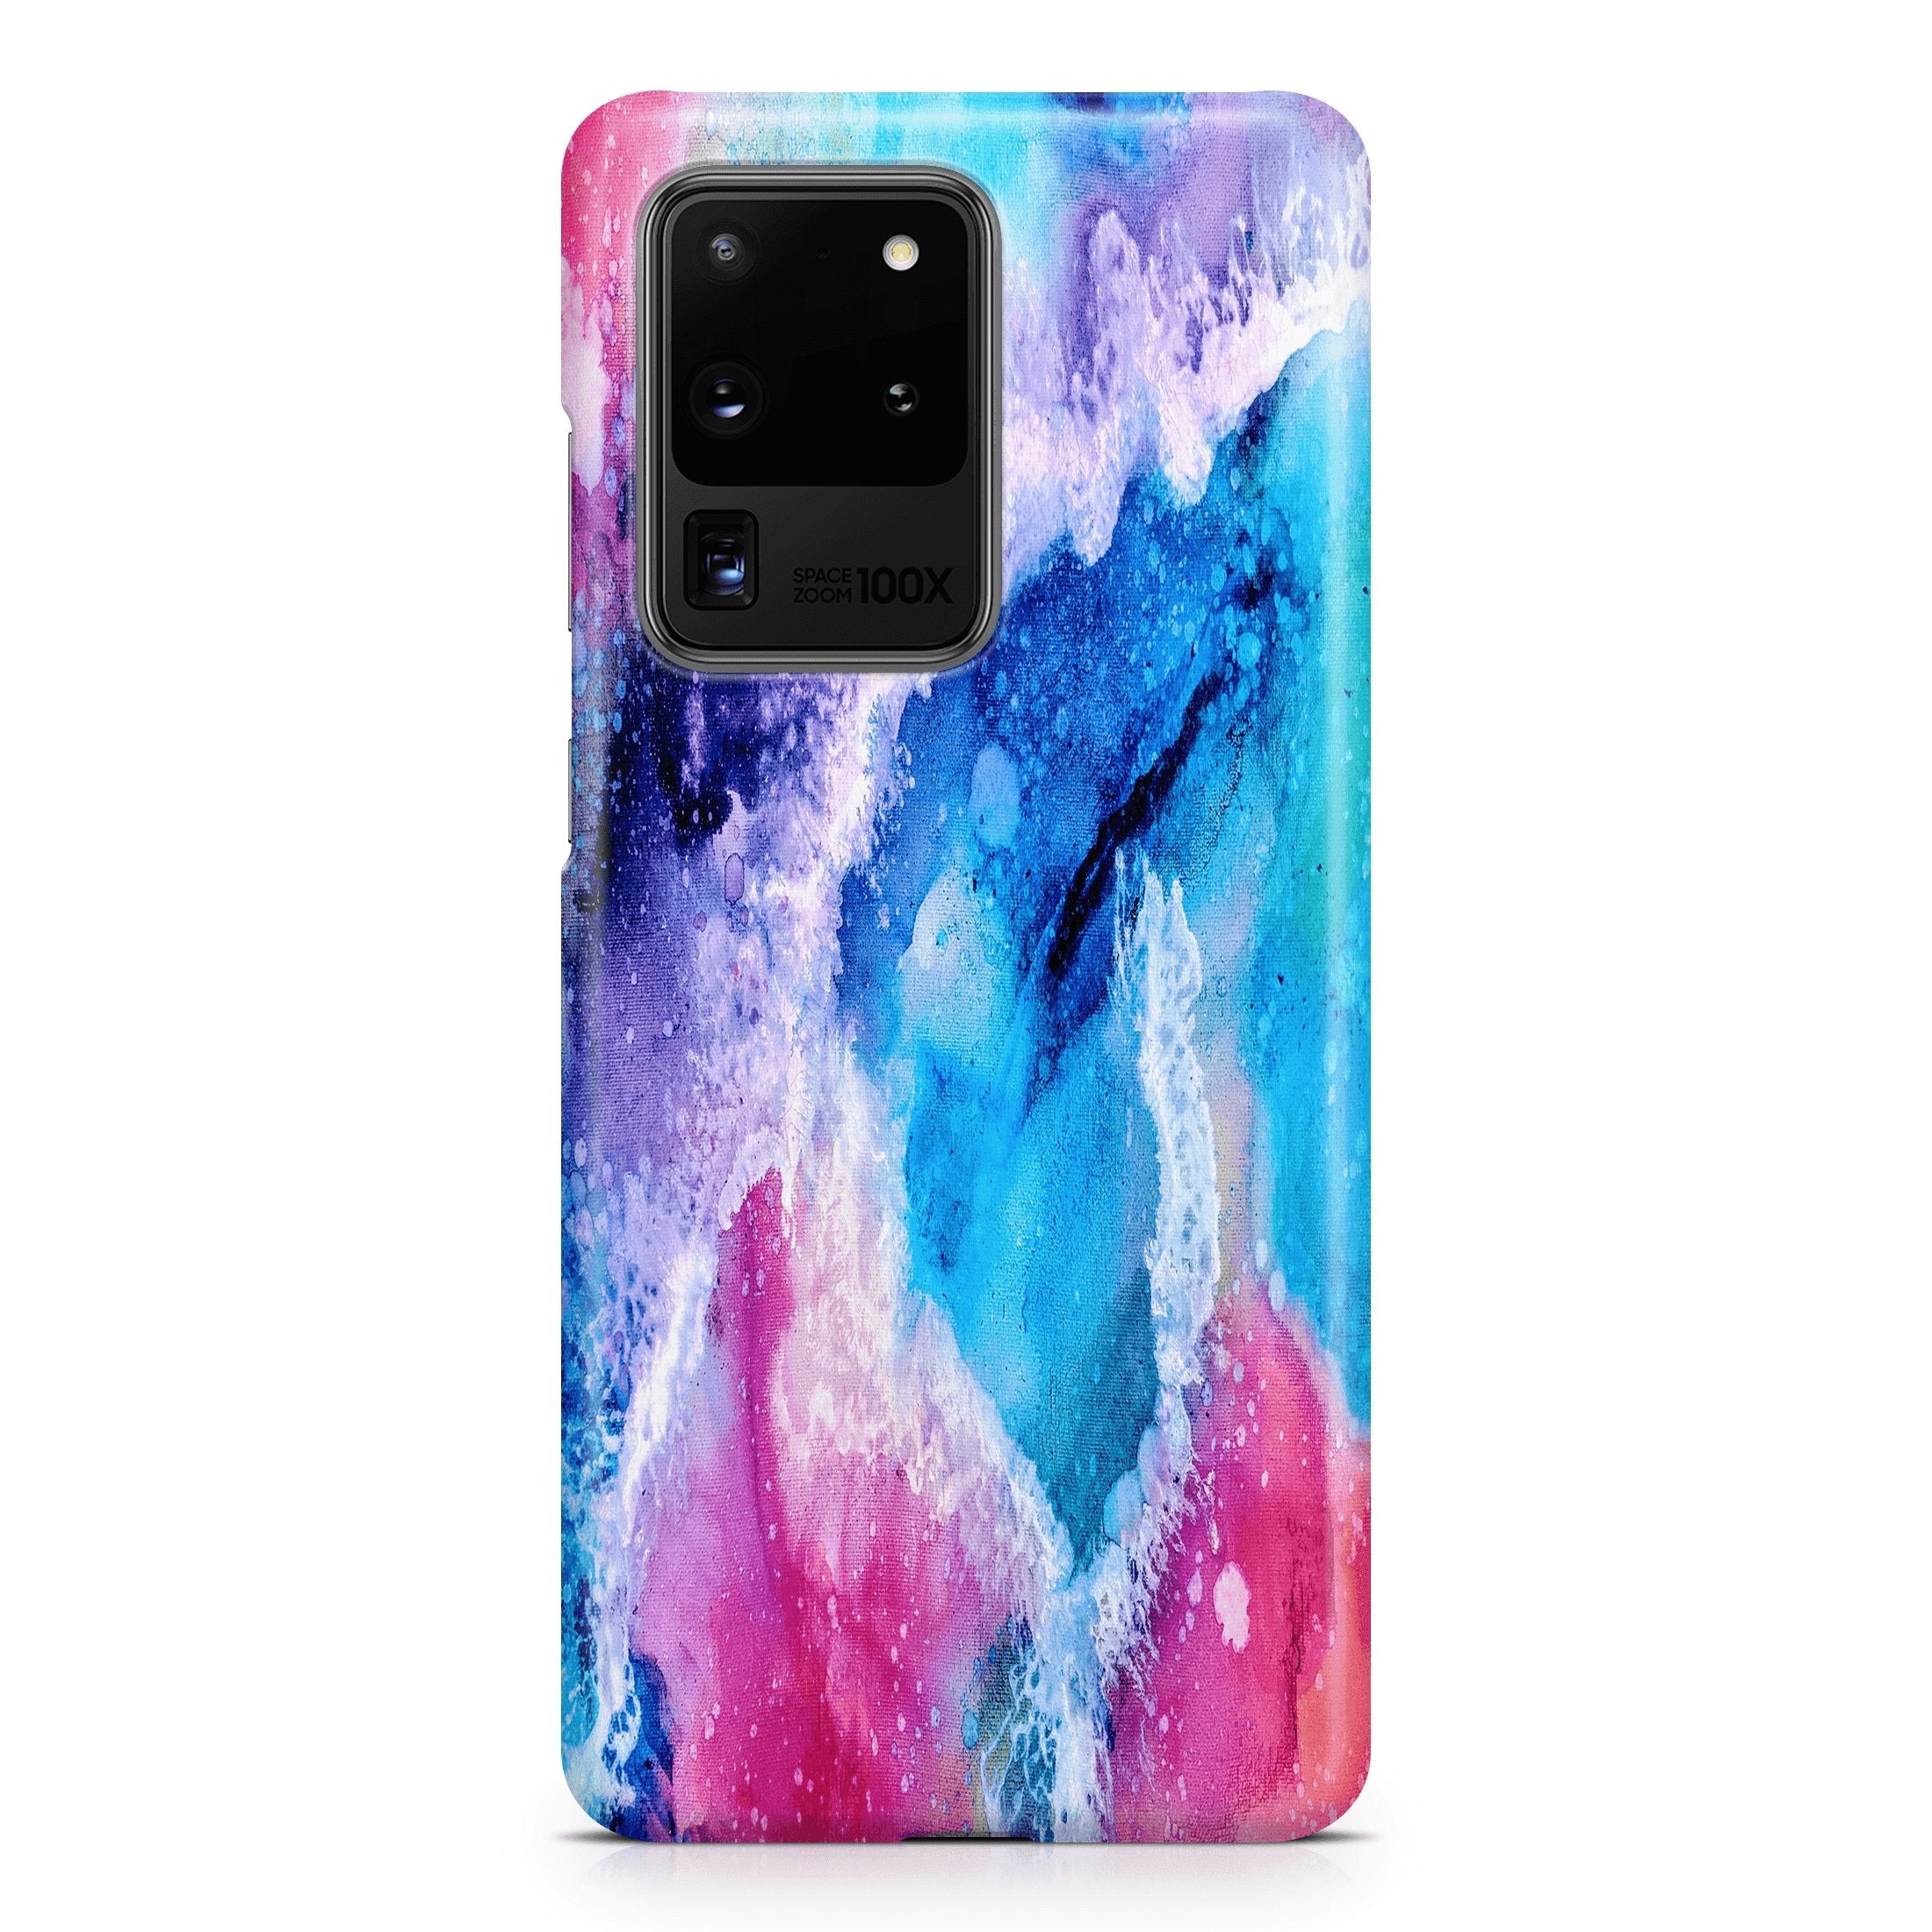 Crashing Waves - Samsung phone case designs by CaseSwagger